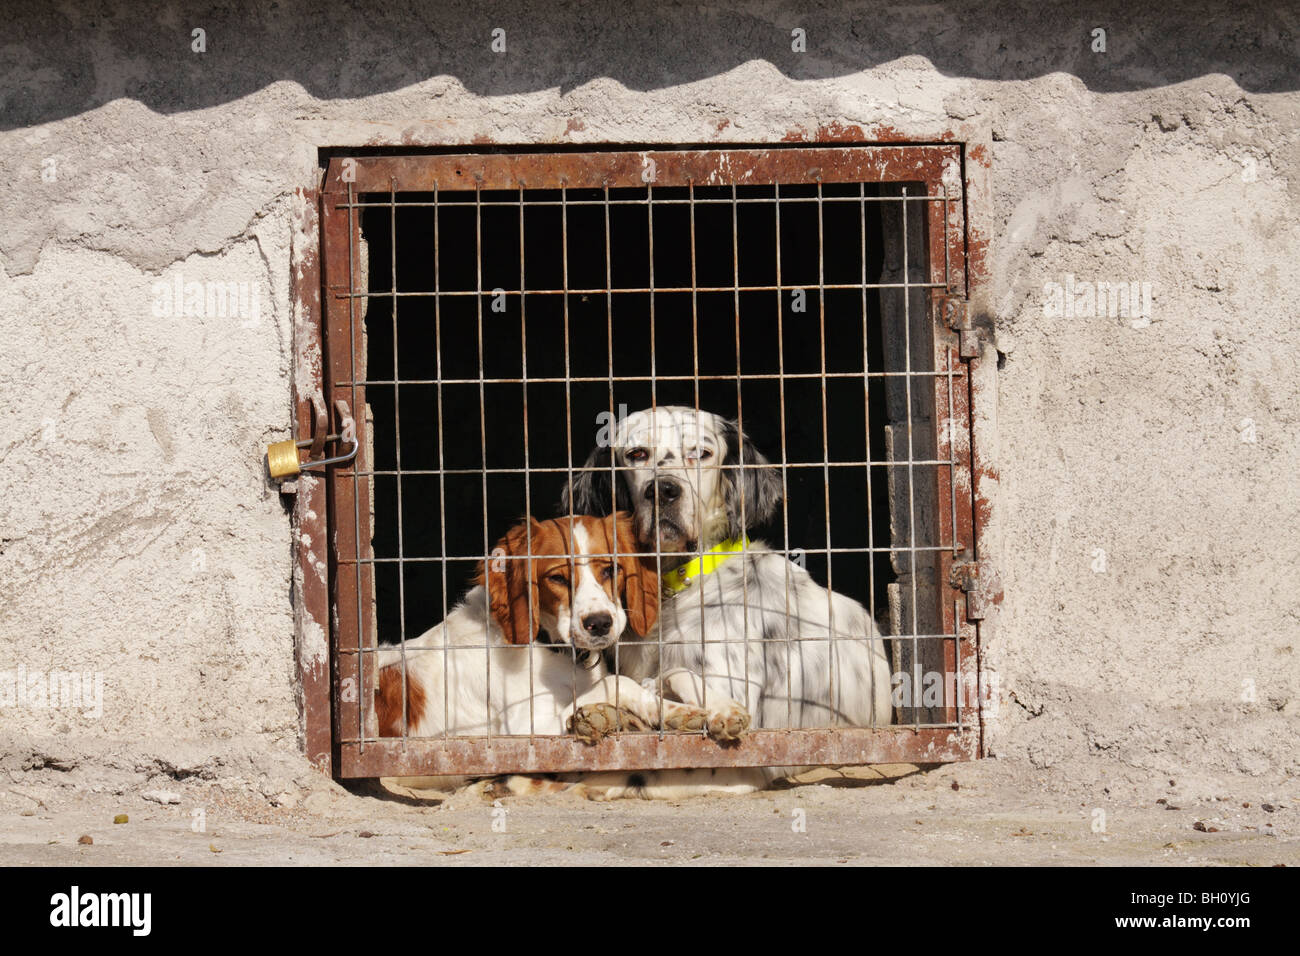 Hunting dogs being kept caged in Greece Stock Photo